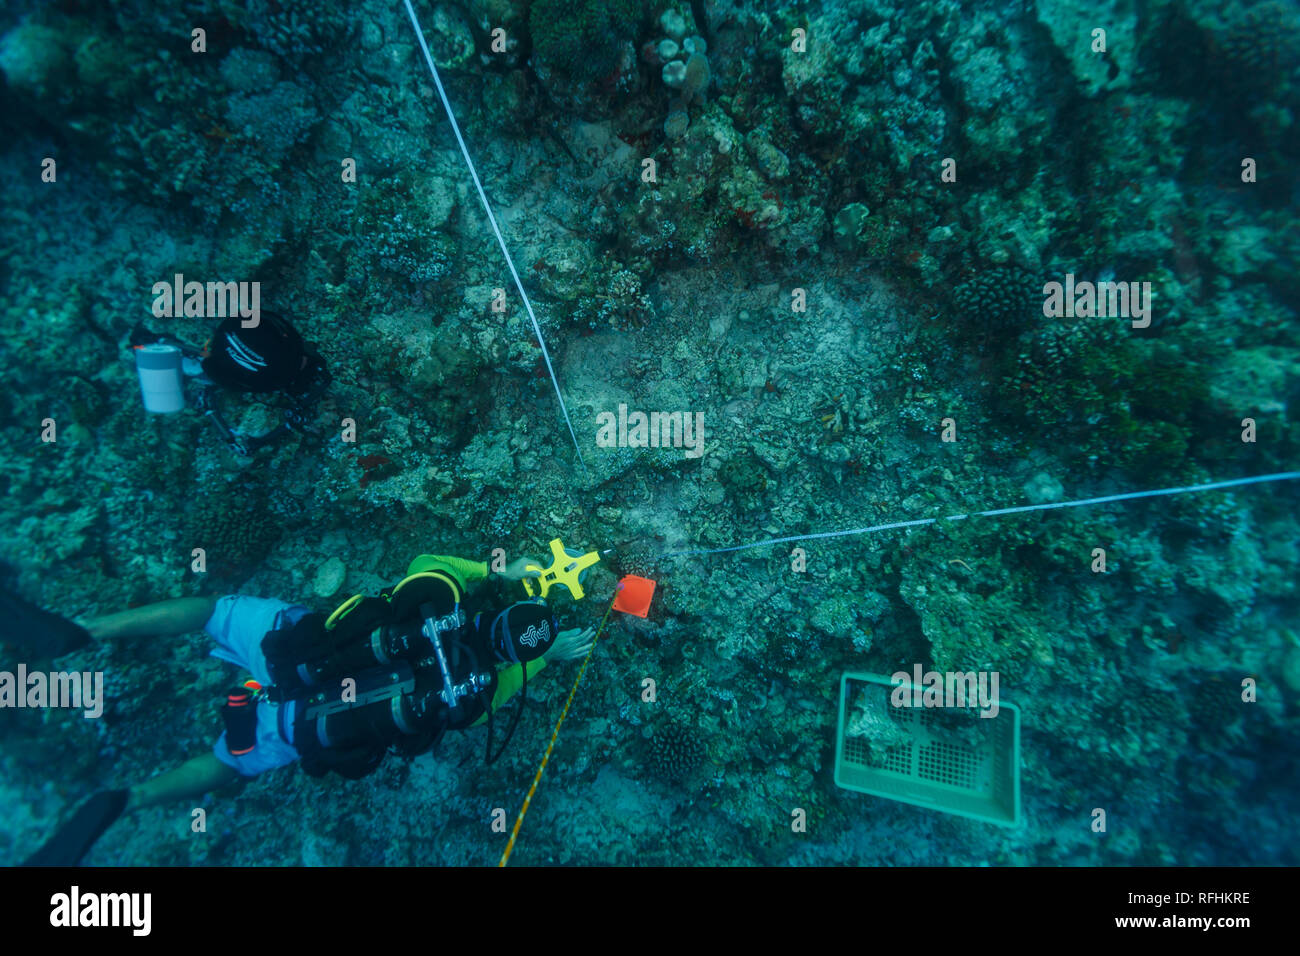 scientific scuba diver sets up transect lines for 3D reef mapping and transect survey Stock Photo